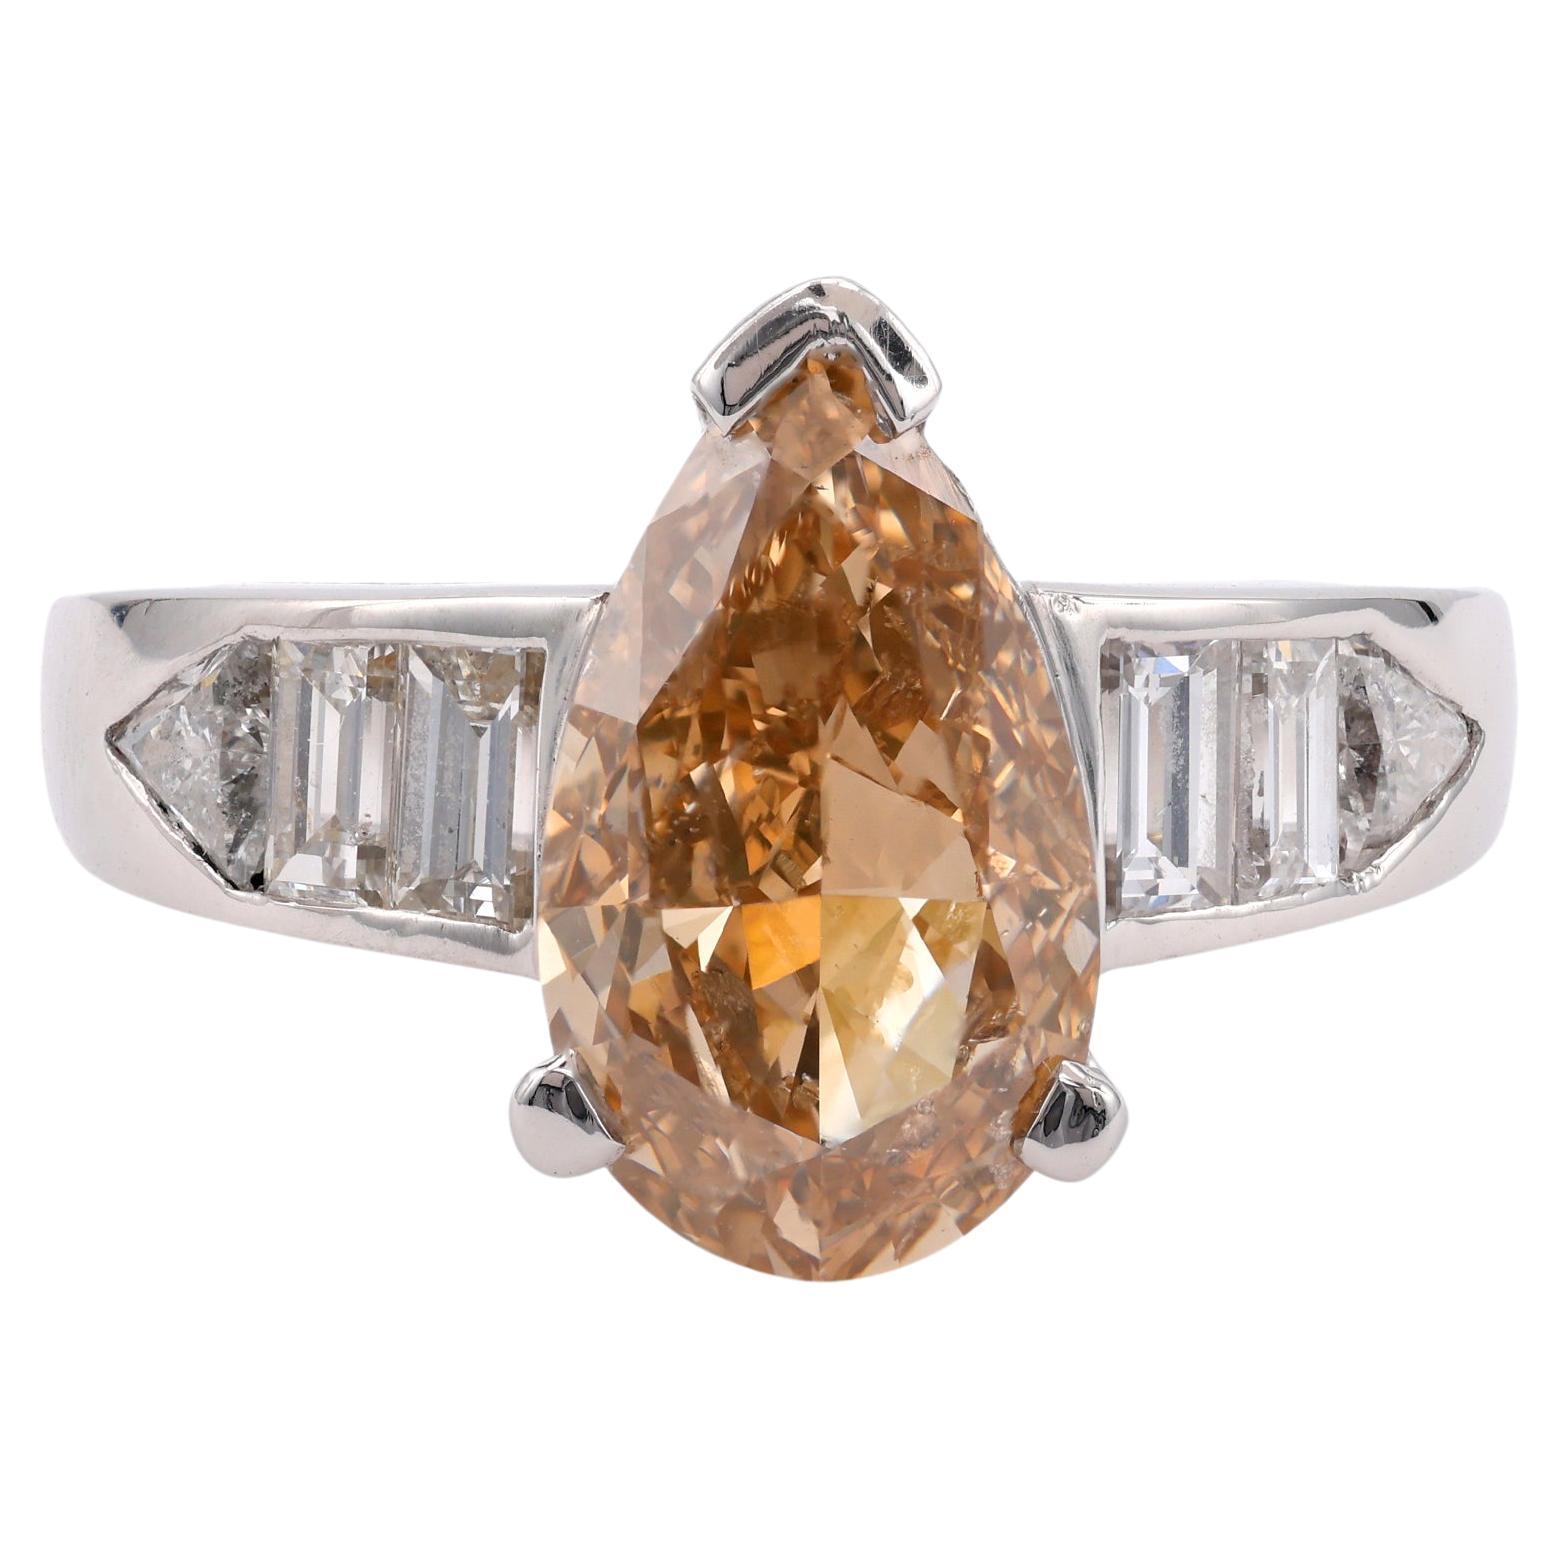 Vintage GIA 2.72 Carat Fancy Brown-Yellow Pear Cut Diamond Platinum Ring For Sale